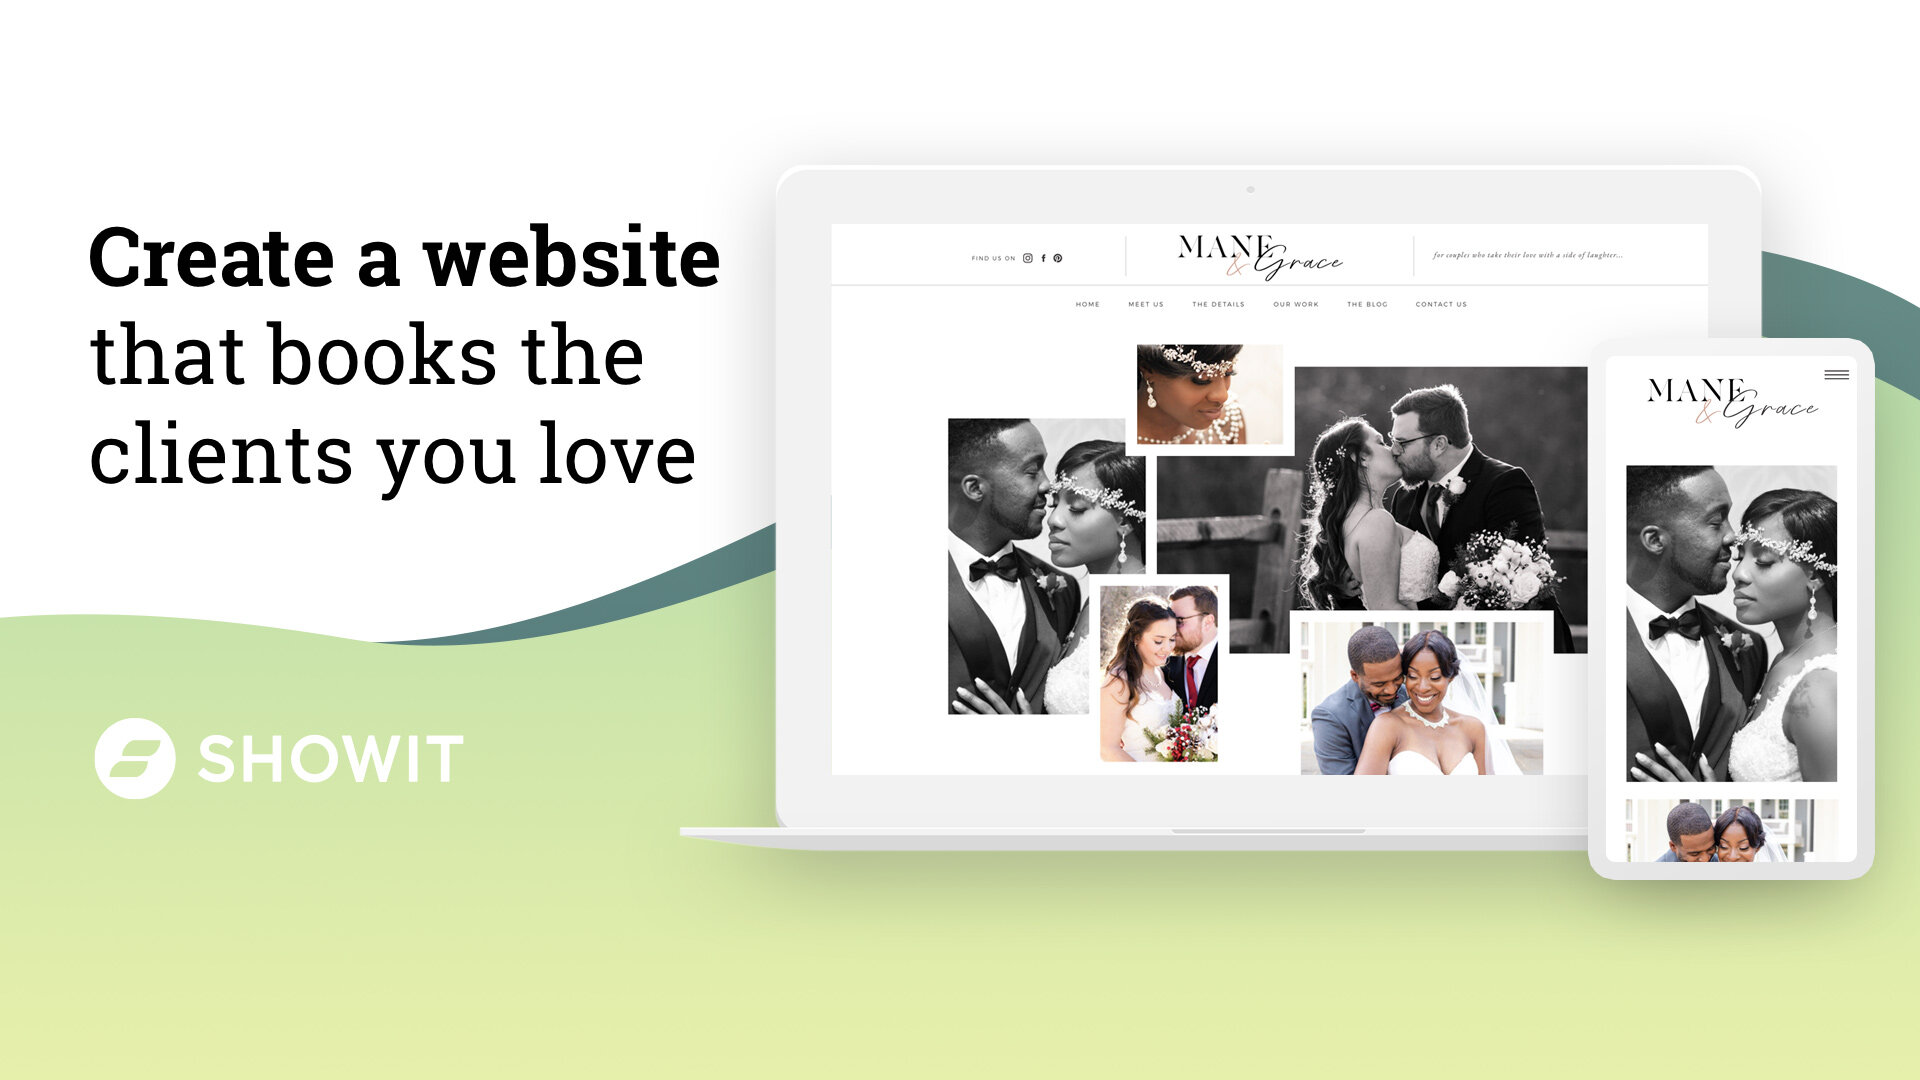 Create a website that books the clients you love